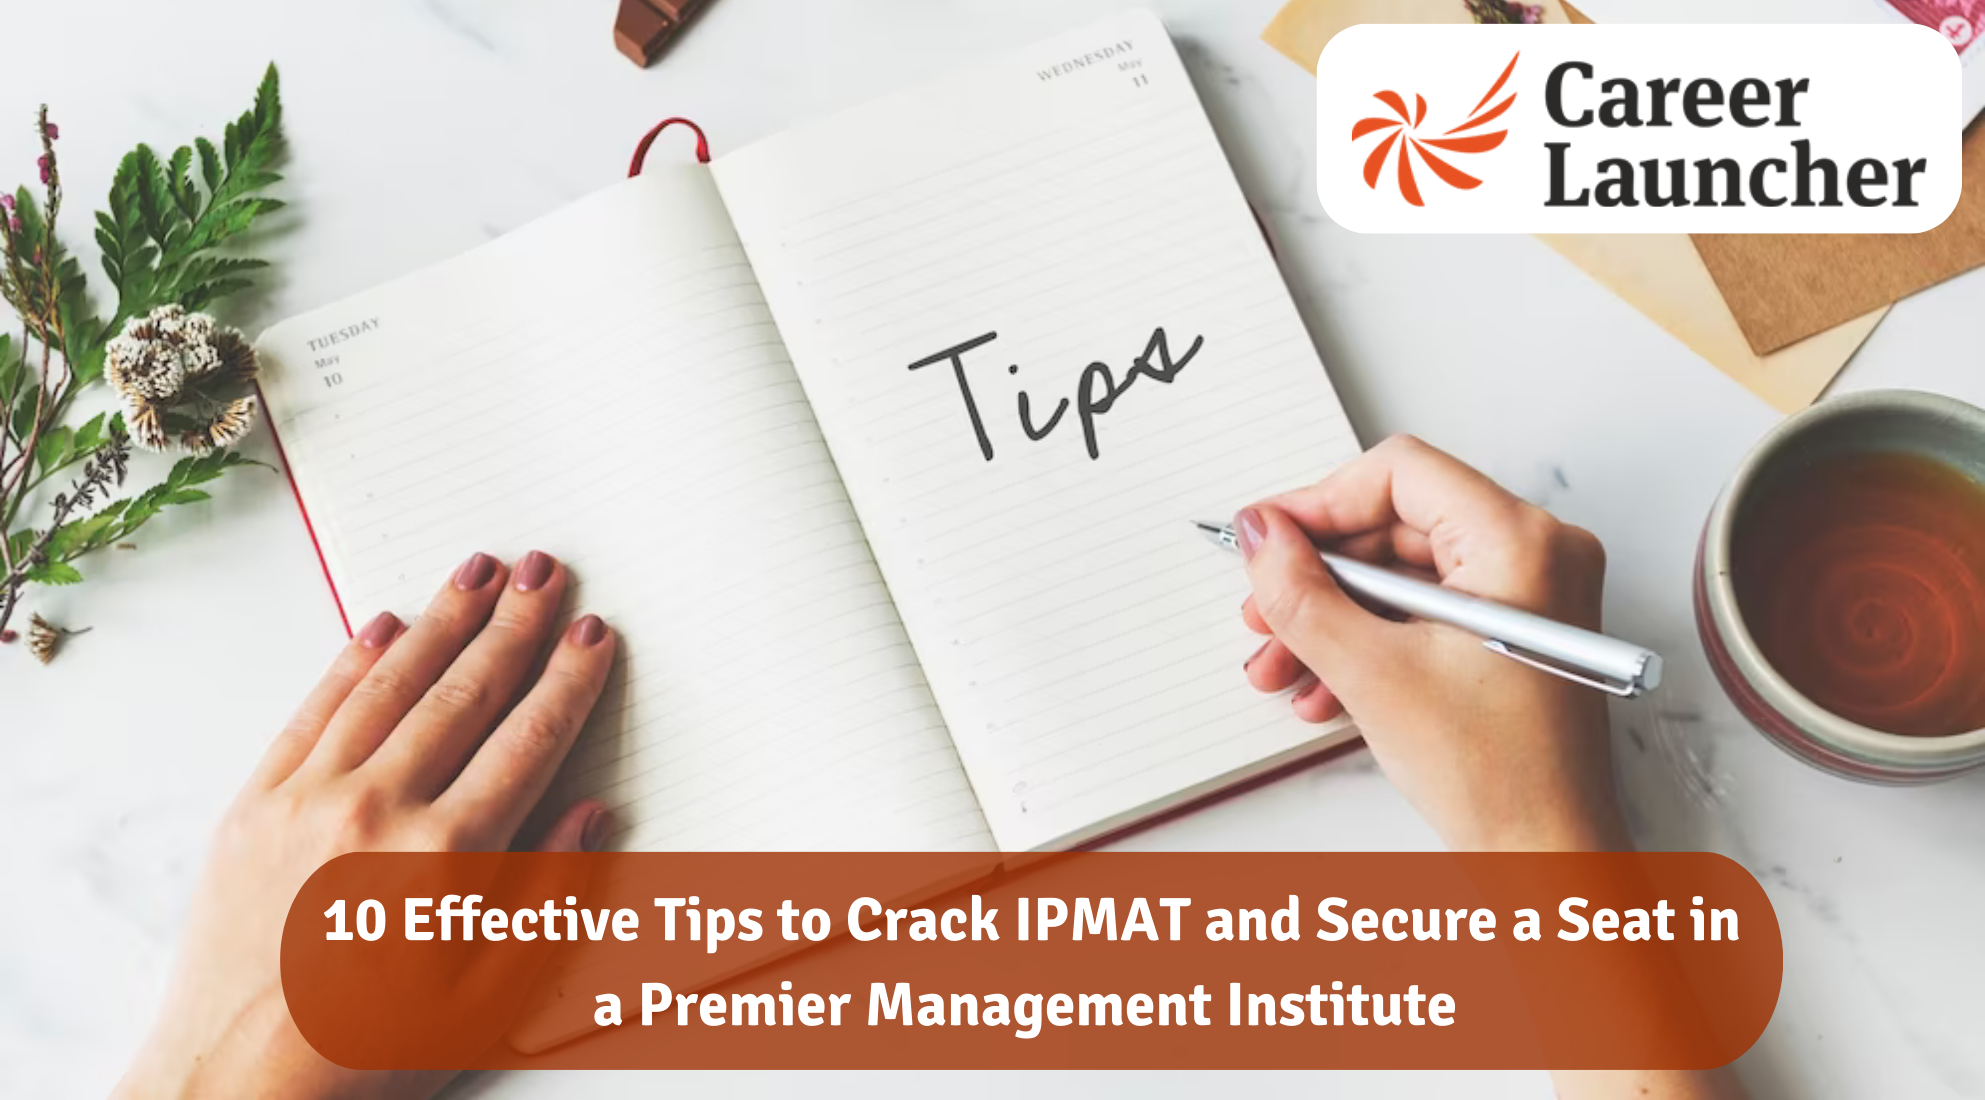 10 Effective Tips to Crack IPMAT and Secure a Seat in a Premier Management Institute  